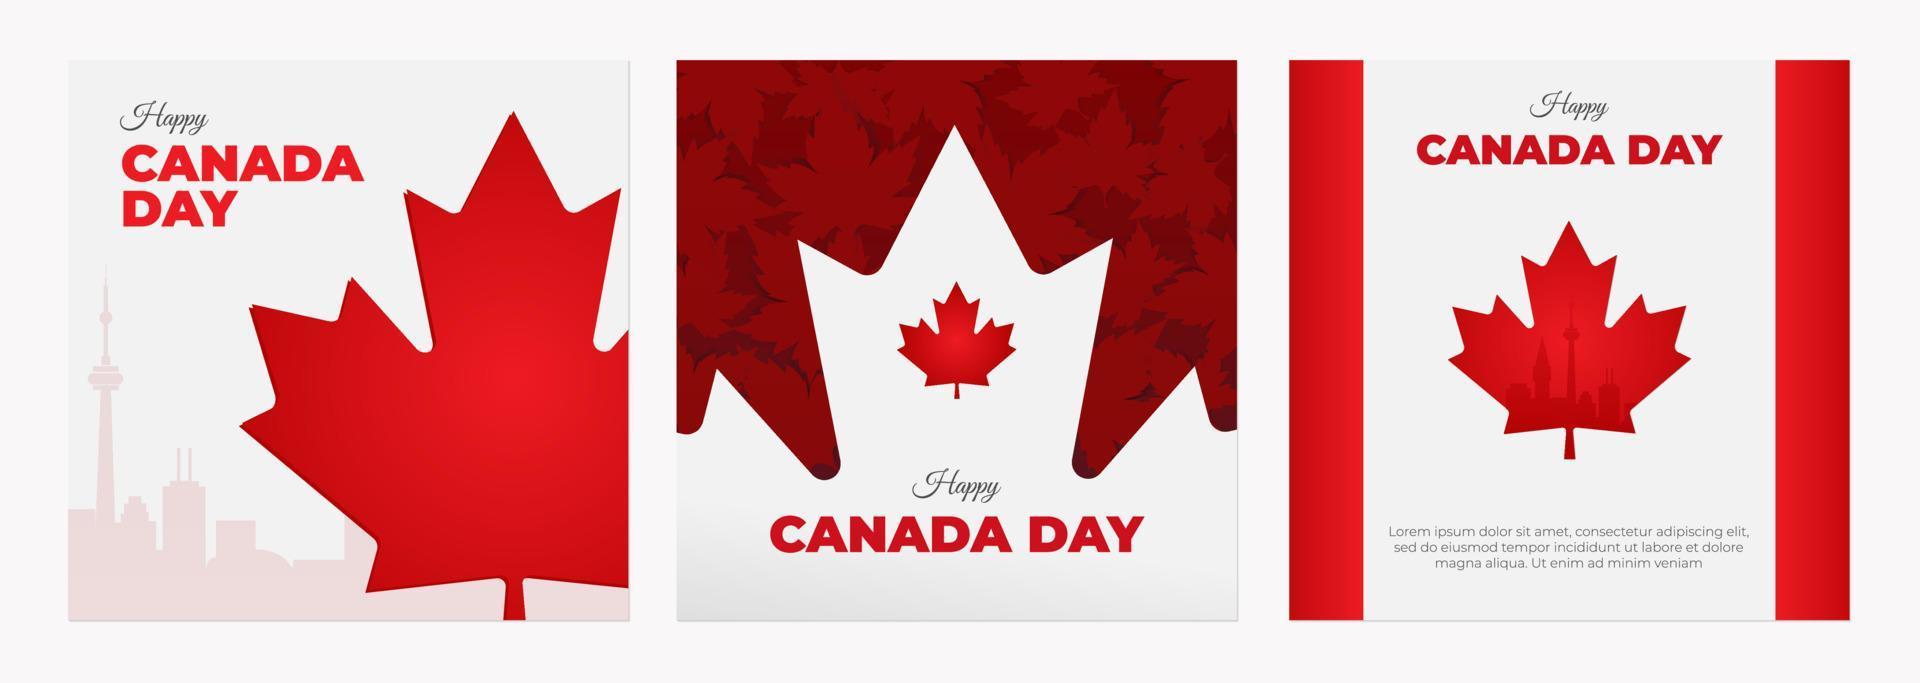 Canada Independence Day. Happy Canada Day vector illustration with maple leaf symbol